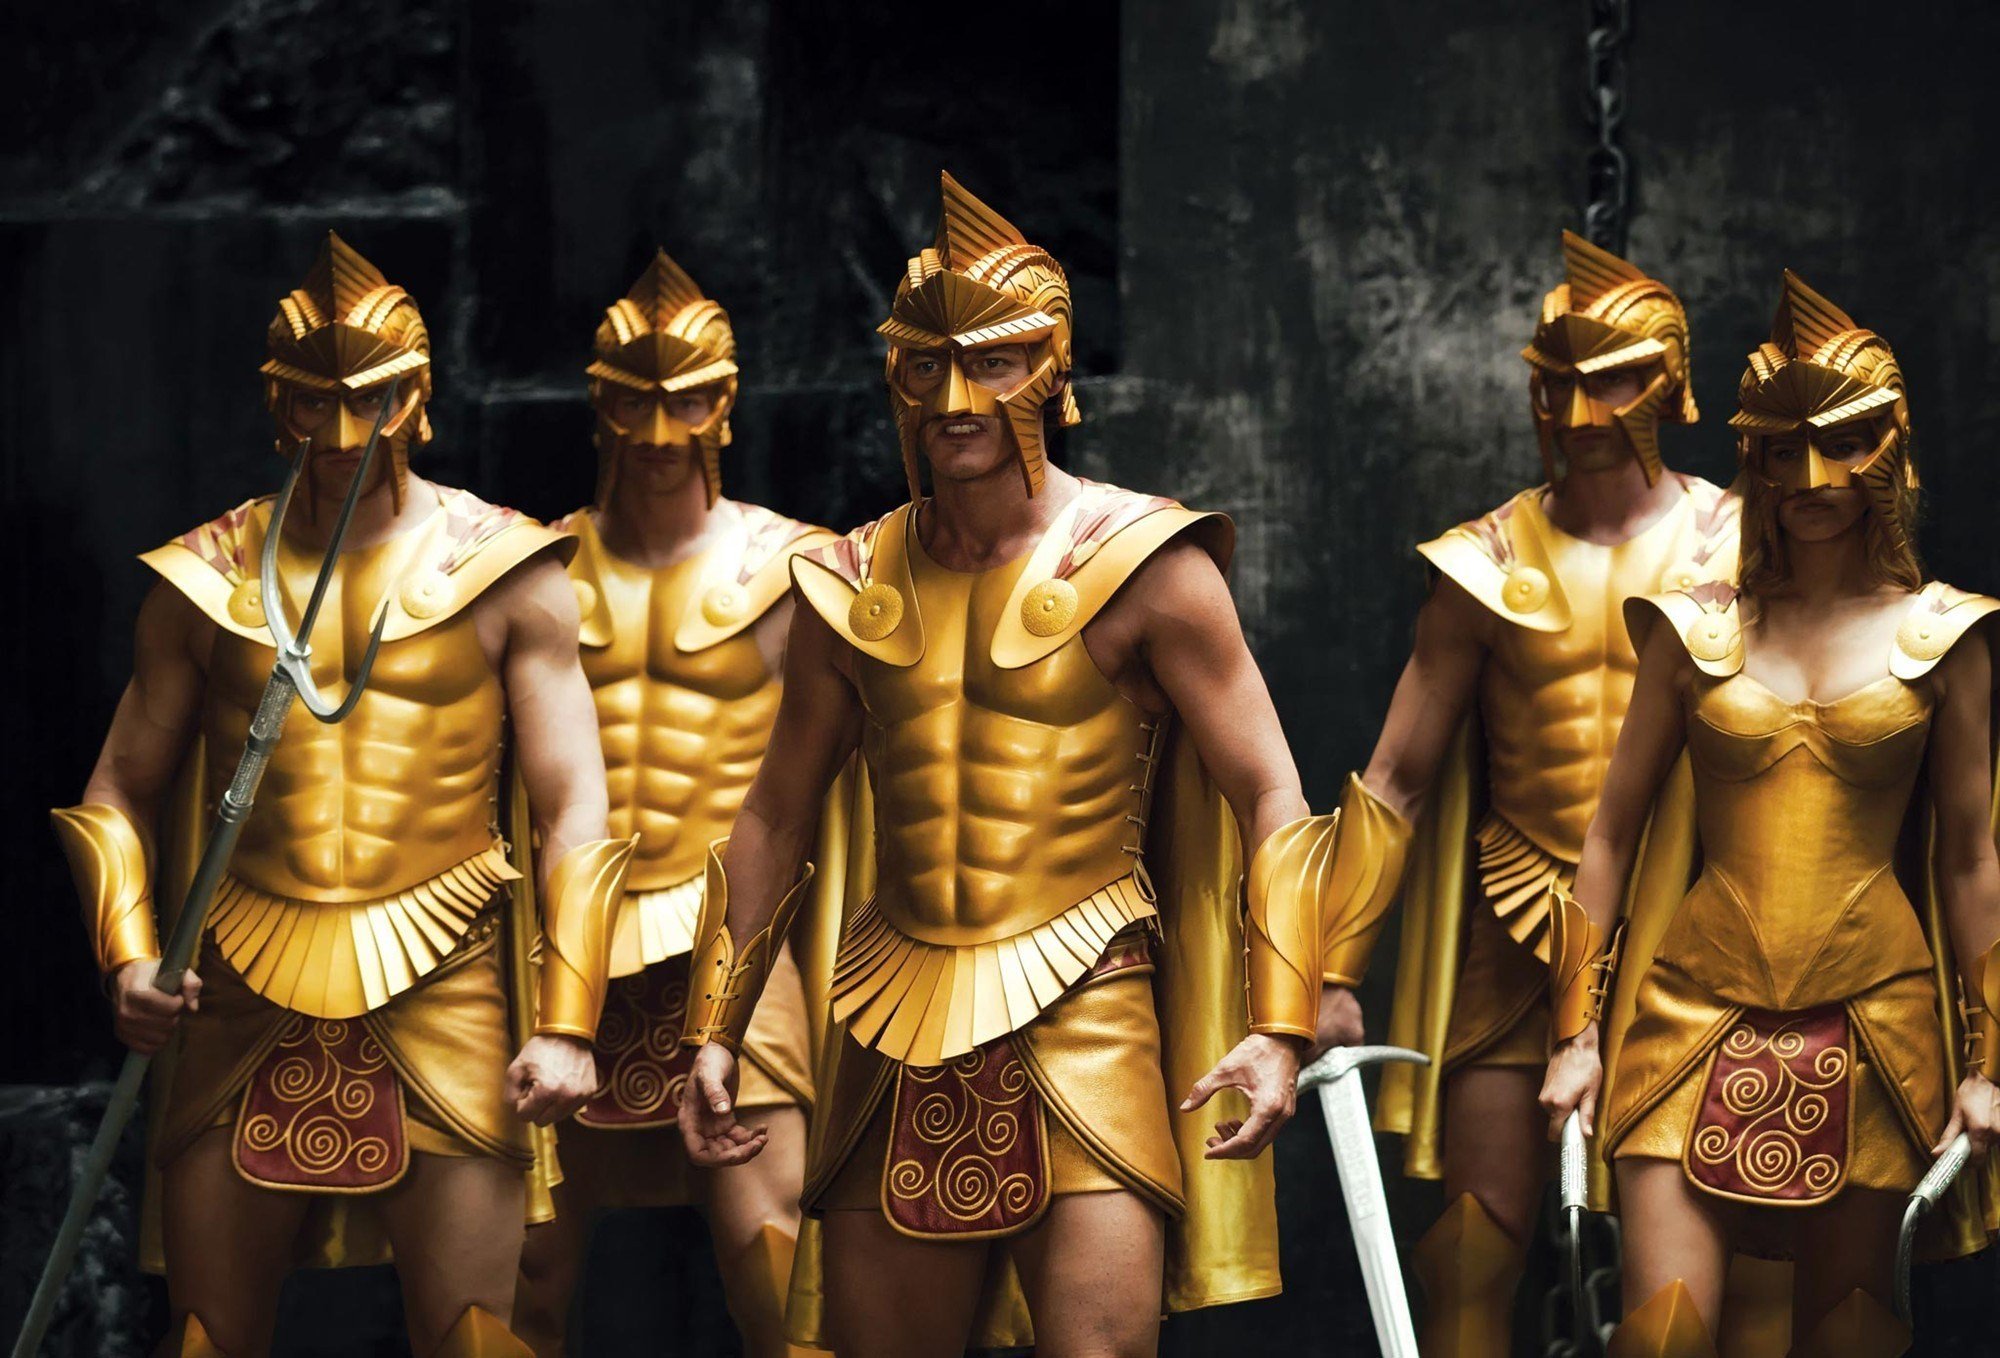 immortals the movie online free